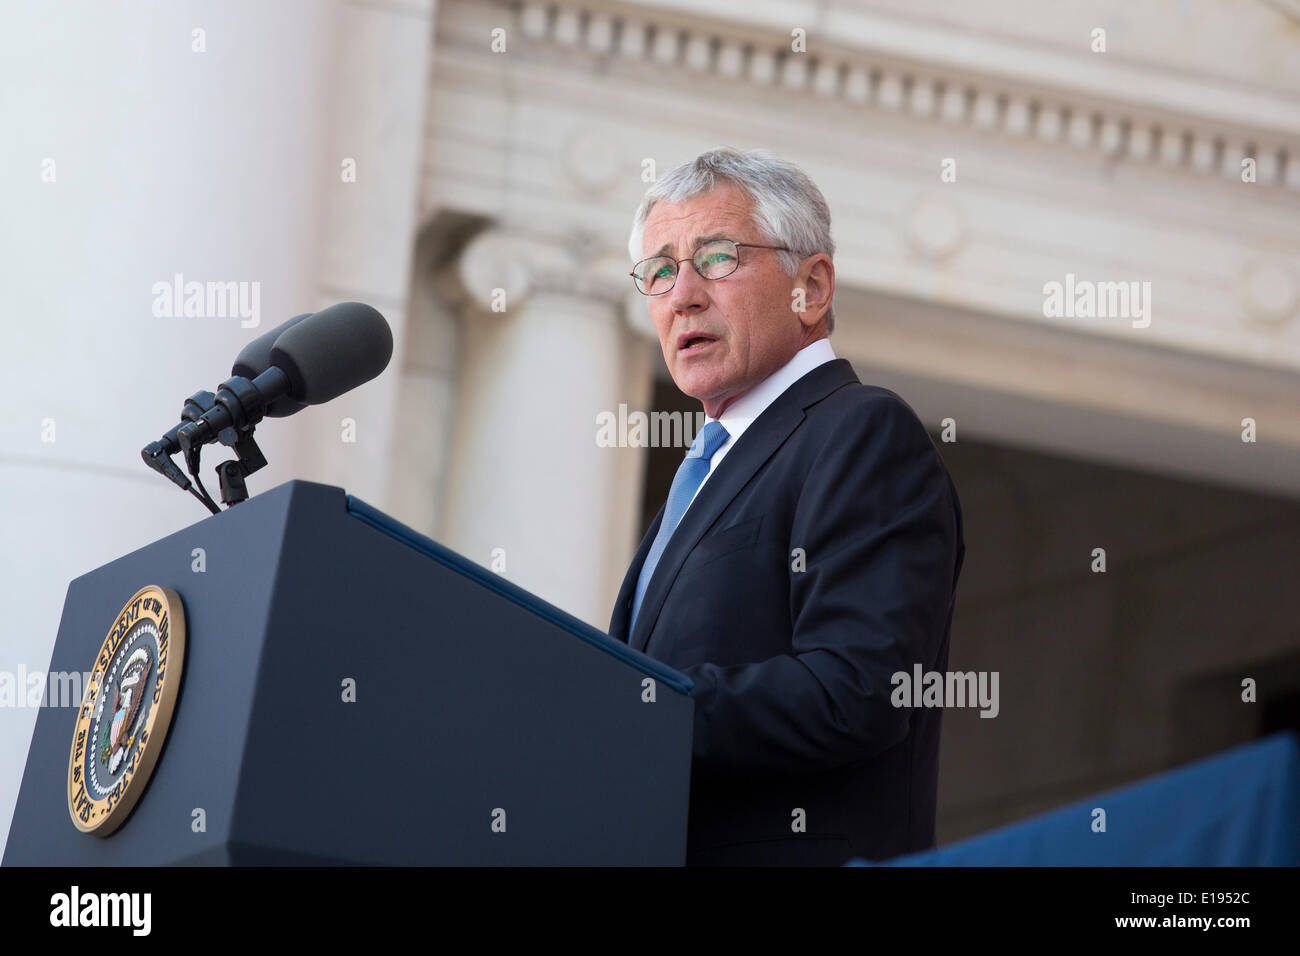 Arlington, Virginia. 26th May, 2014. United States Secretary of Defense Chuck Hagel delivers remarks during a Memorial Day event at Arlington National Cemetery, May 26, 2014 in Arlington, Virginia. President Obama returned to Washington Monday morning after a surprise visit to Afghanistan to visit U.S. troops at Bagram Air Field. Credit: Drew Angerer/Pool via CNP/dpa/Alamy Live News Stock Photo